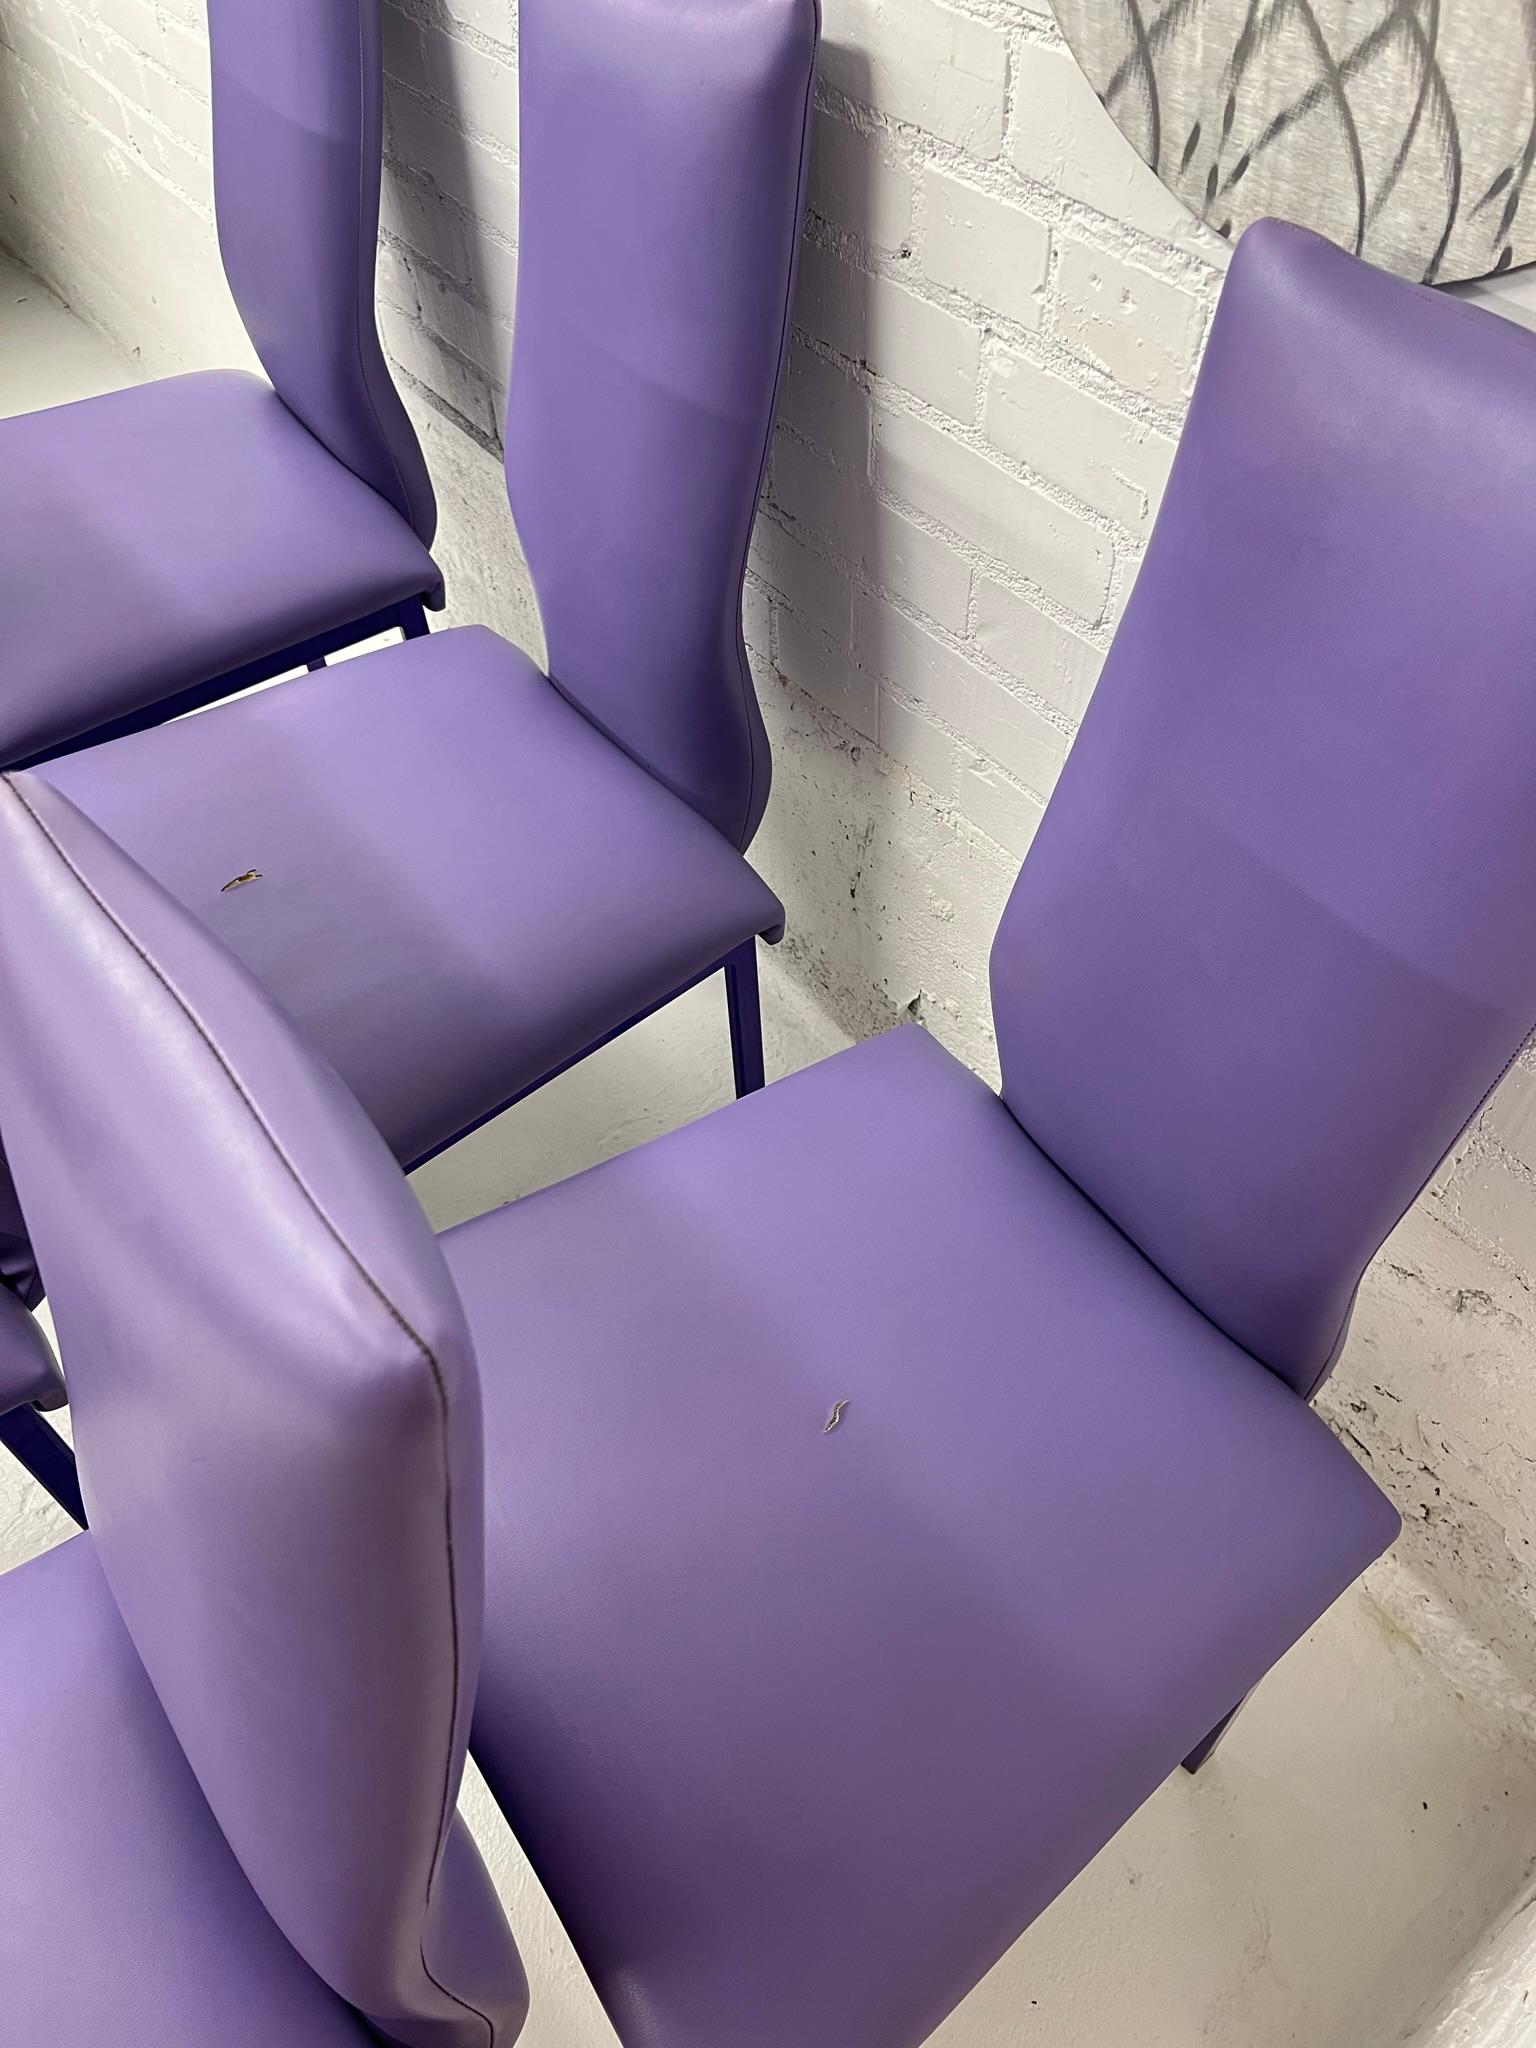 Minson Corp. Postmodern Sculptural Lavender Purple Chairs - Set of 6 For Sale 1